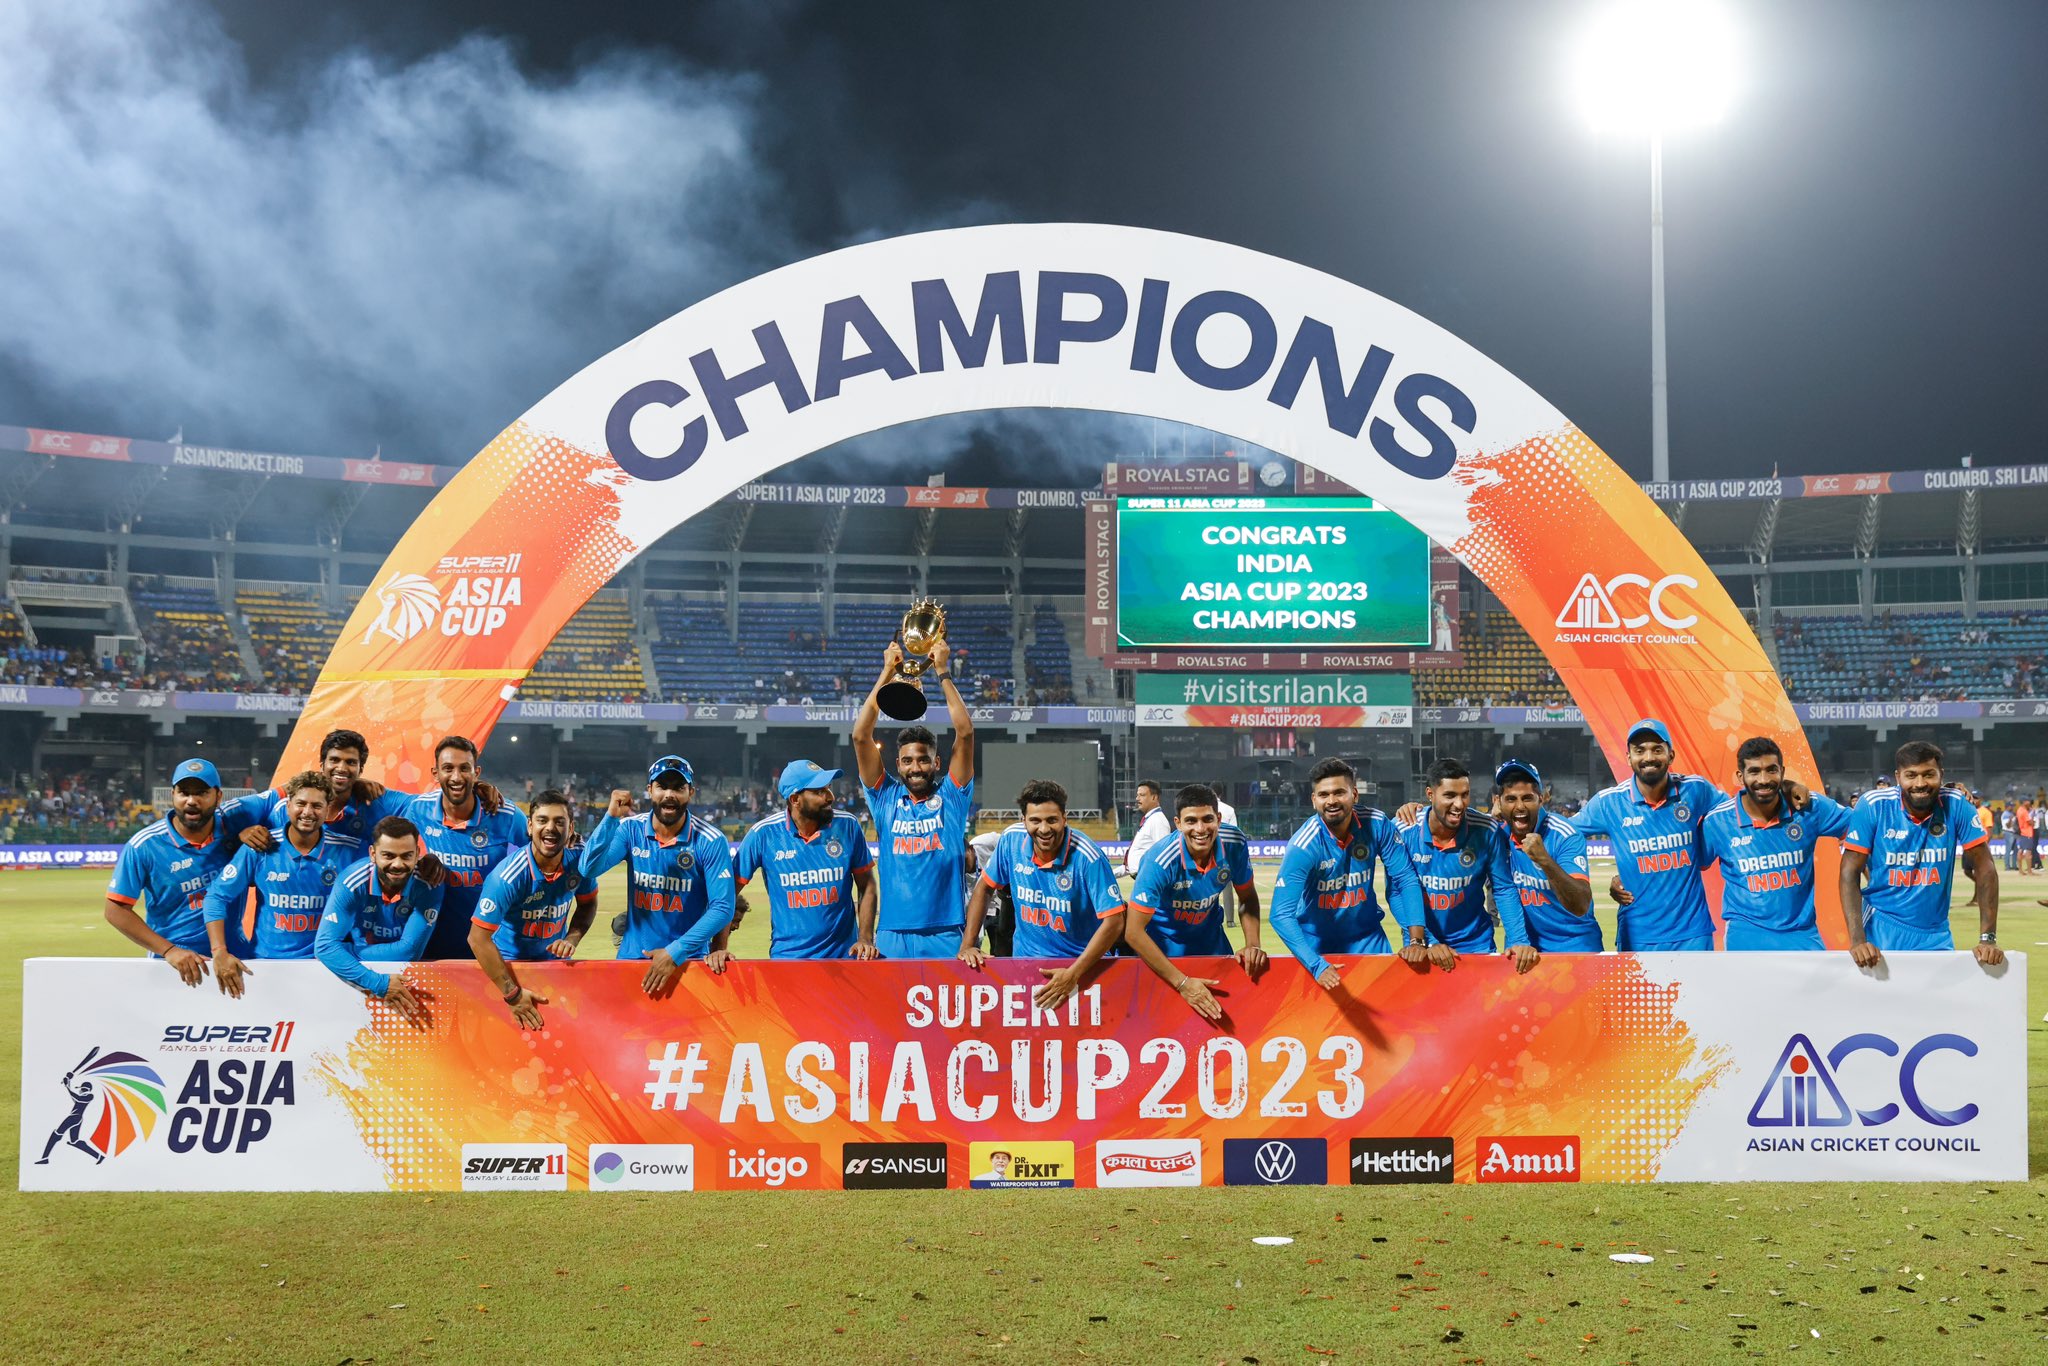 India- New Champion of Asia Cup 2023